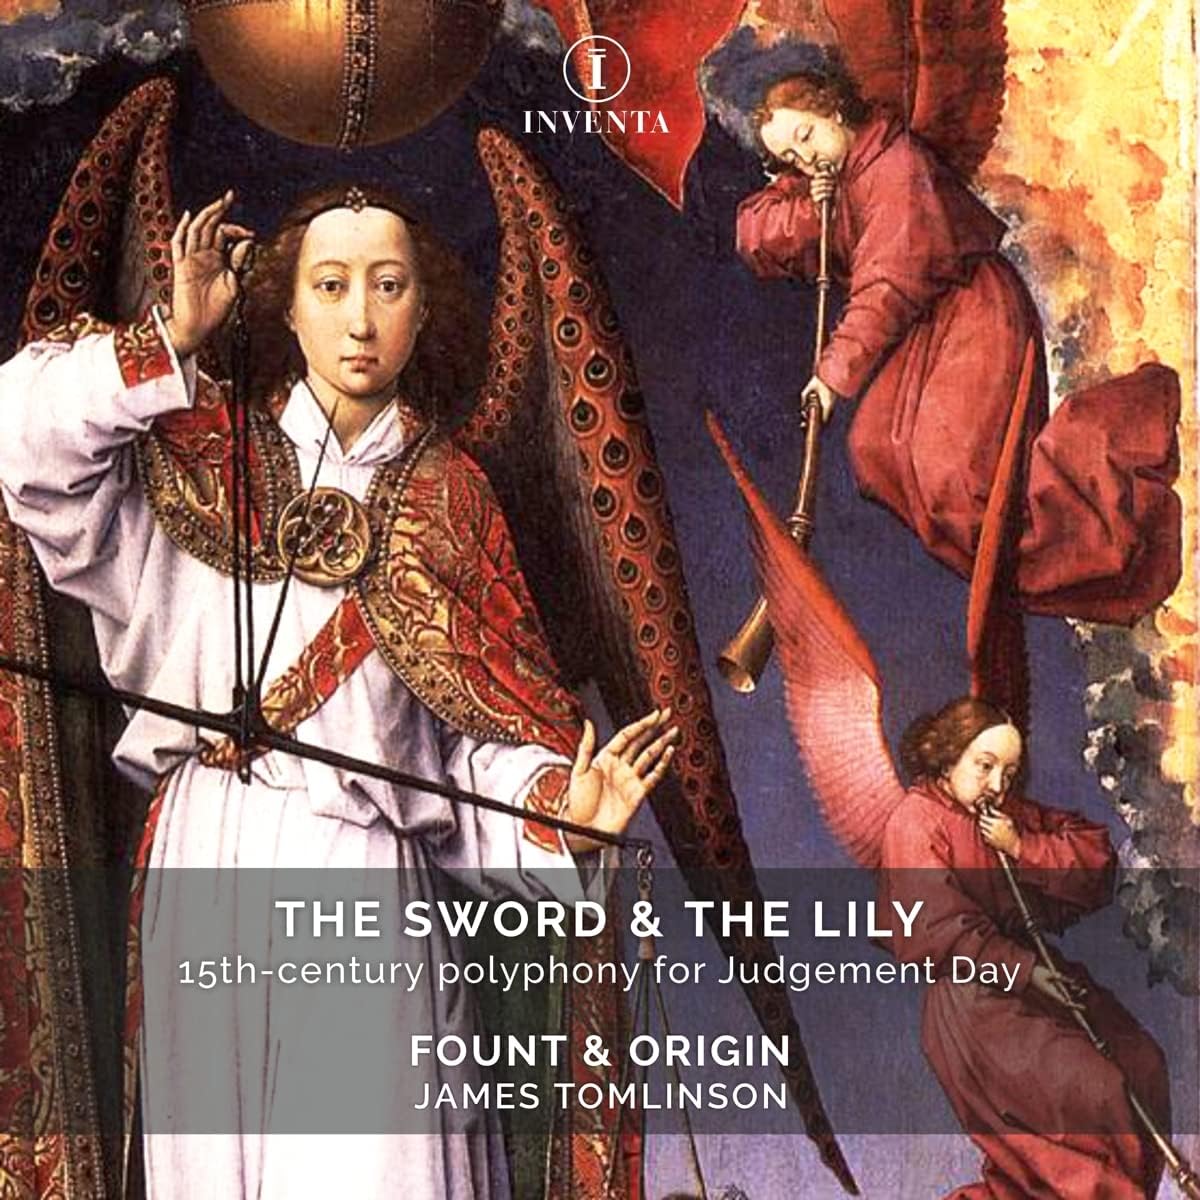 The sword & the lilly Fount & Origin